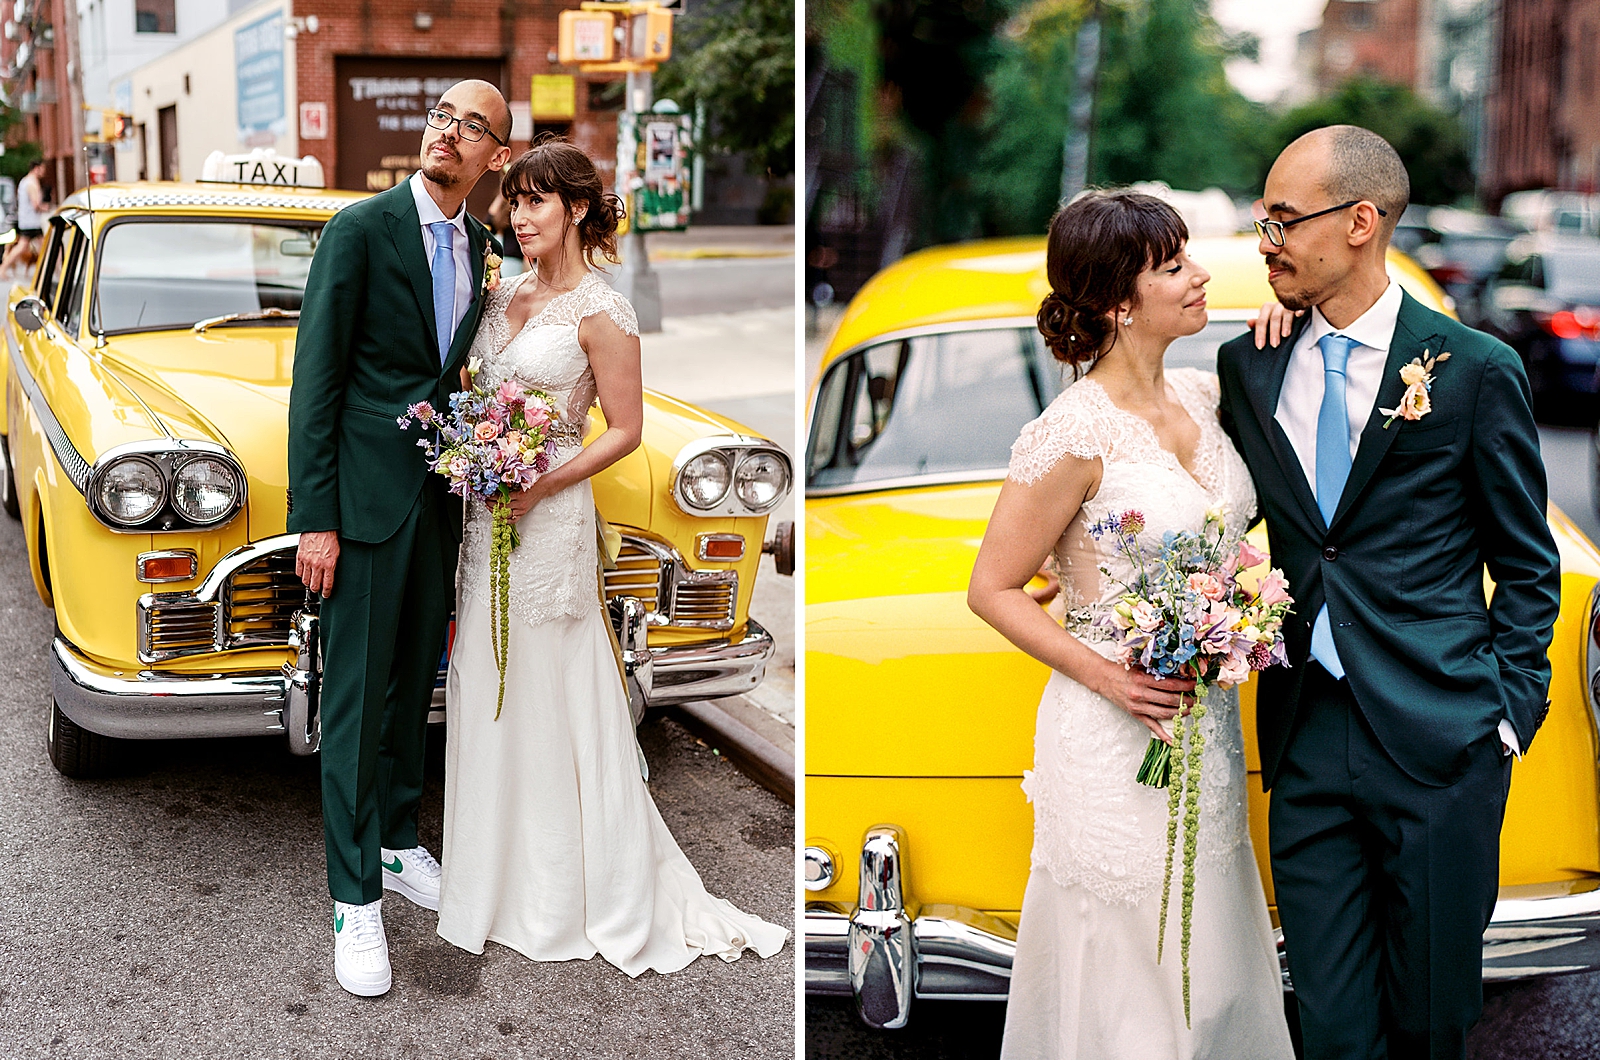 Left photo: Full body shot of the bride and groom standing in front of an old taxicab as they stare off into the distance.
Right photo: Shot of the bride and groom smiling at each other as they stand in front of an old taxicab. 